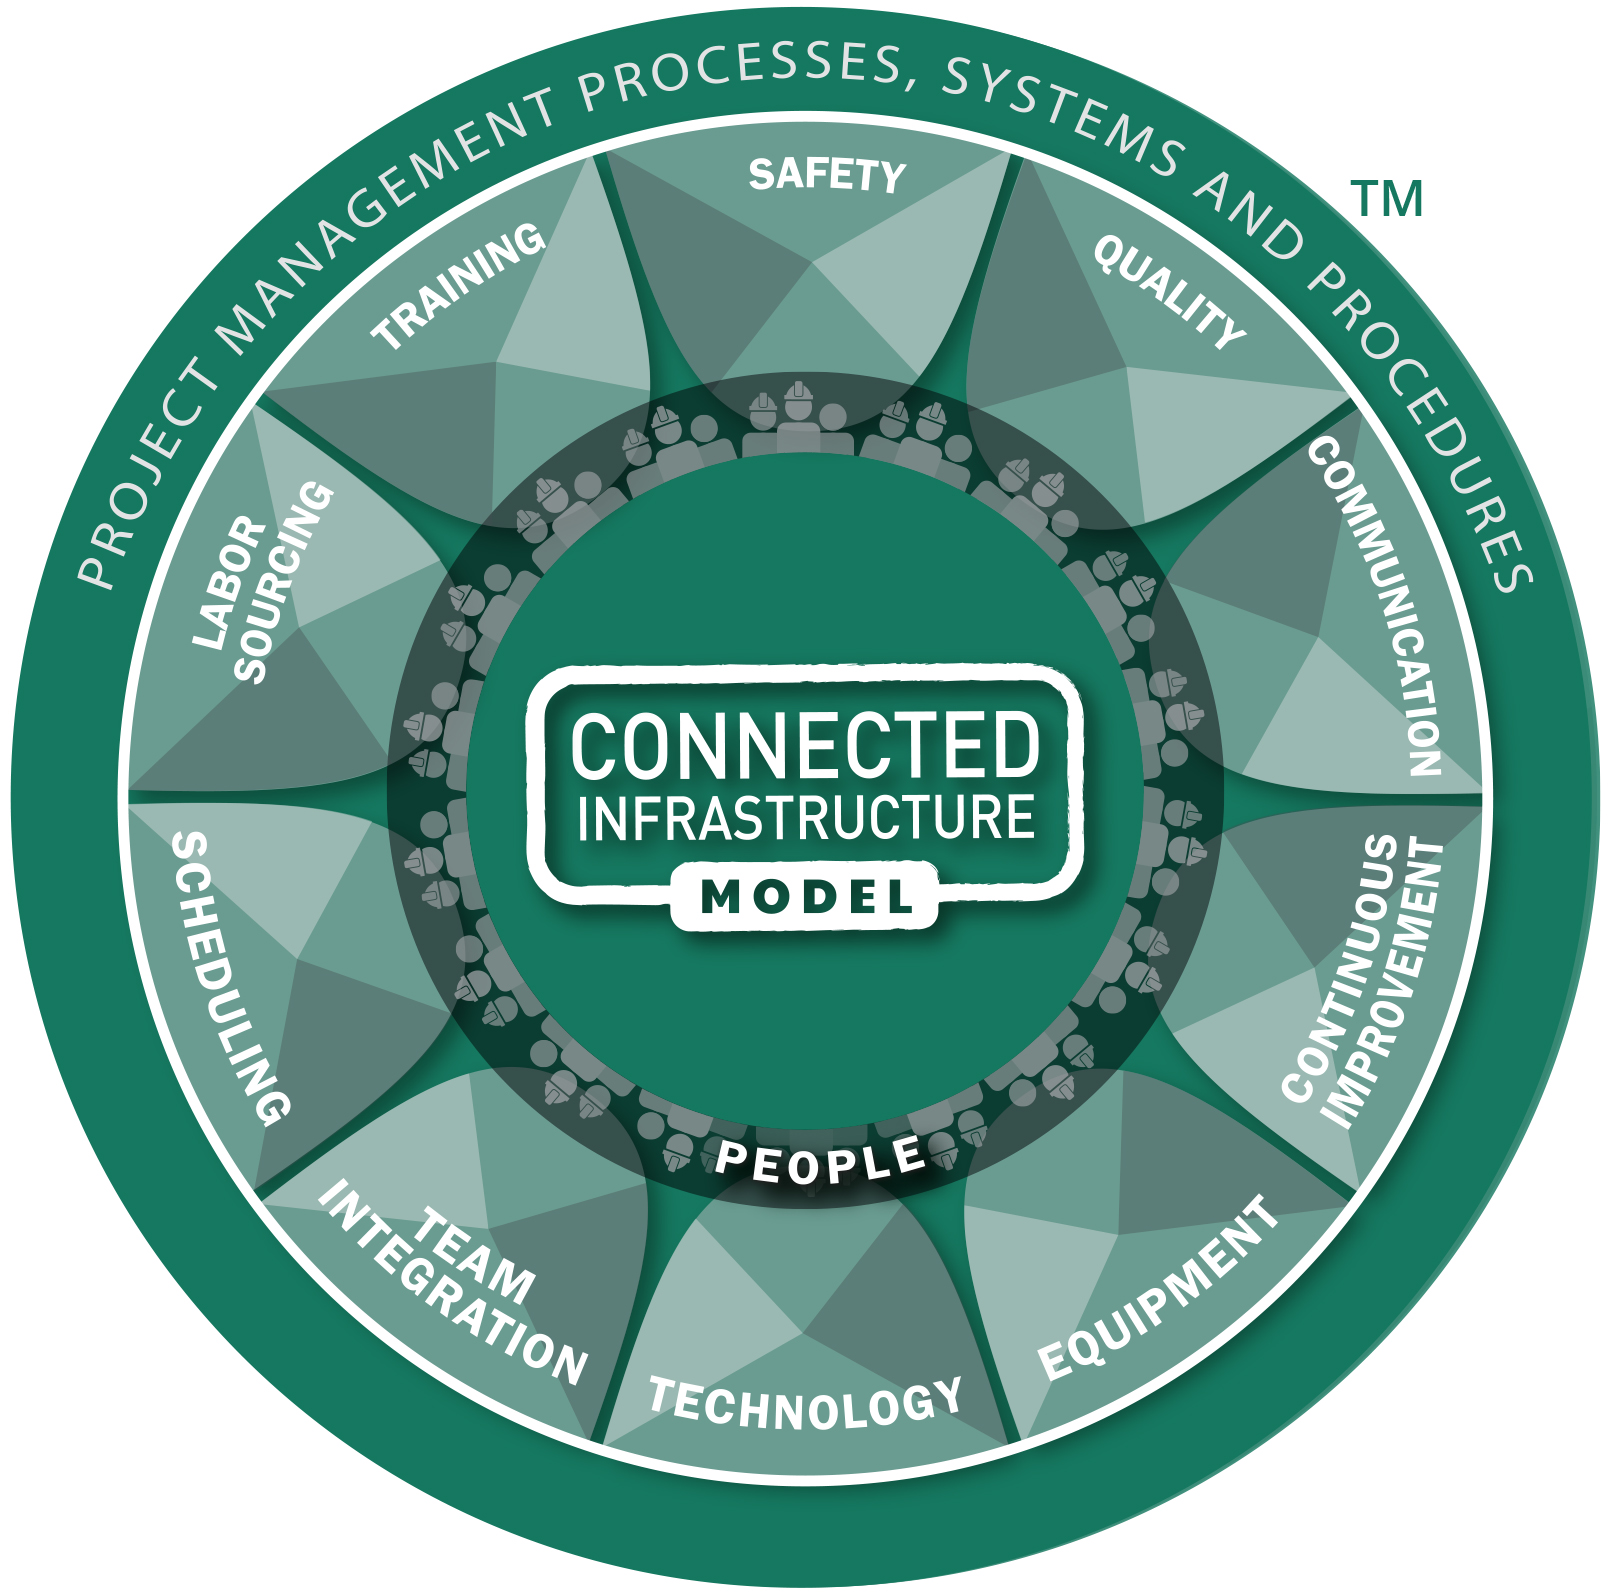 The Connected Infrastructure Model